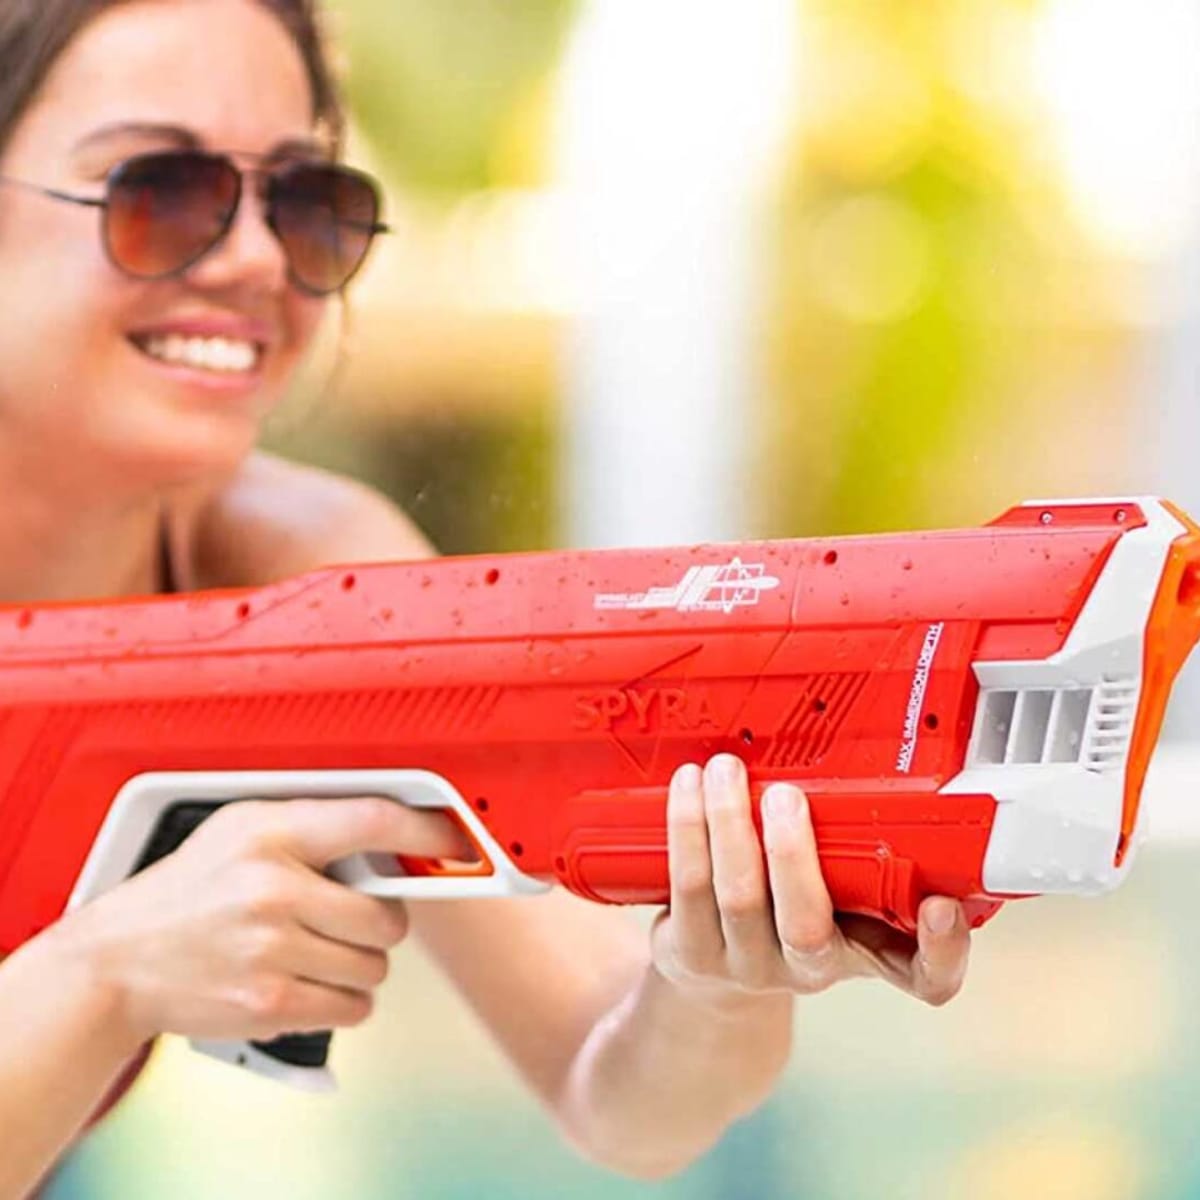 Honest Review: The Spyra Two (THE BEST WATER GUN THIS DECADE JUST